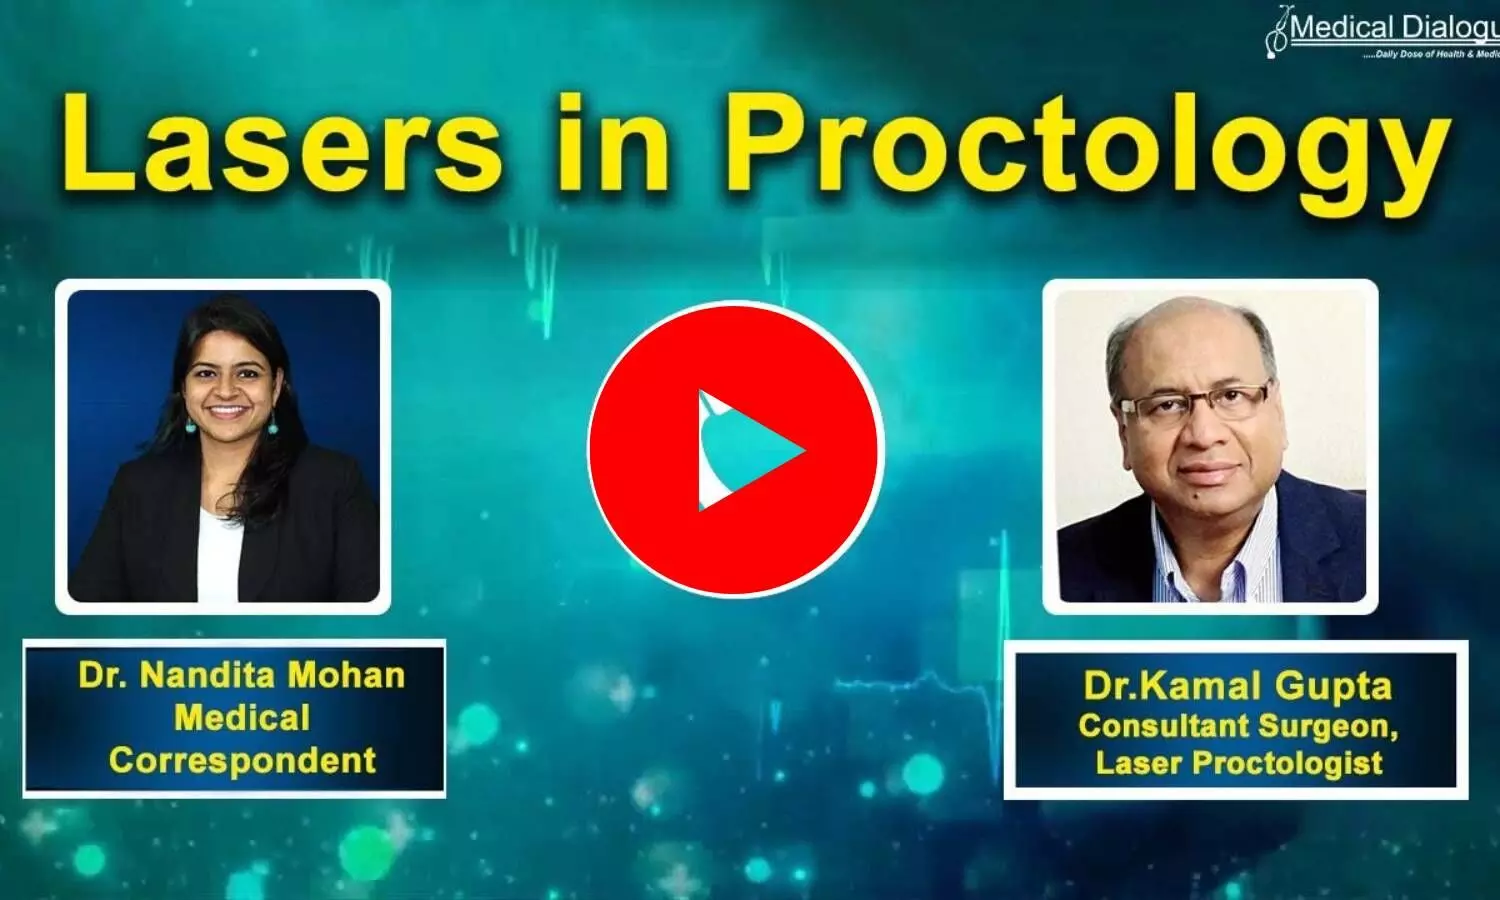 Book Review on Lasers in Proctology- Discussion with Dr Kamal Gupta